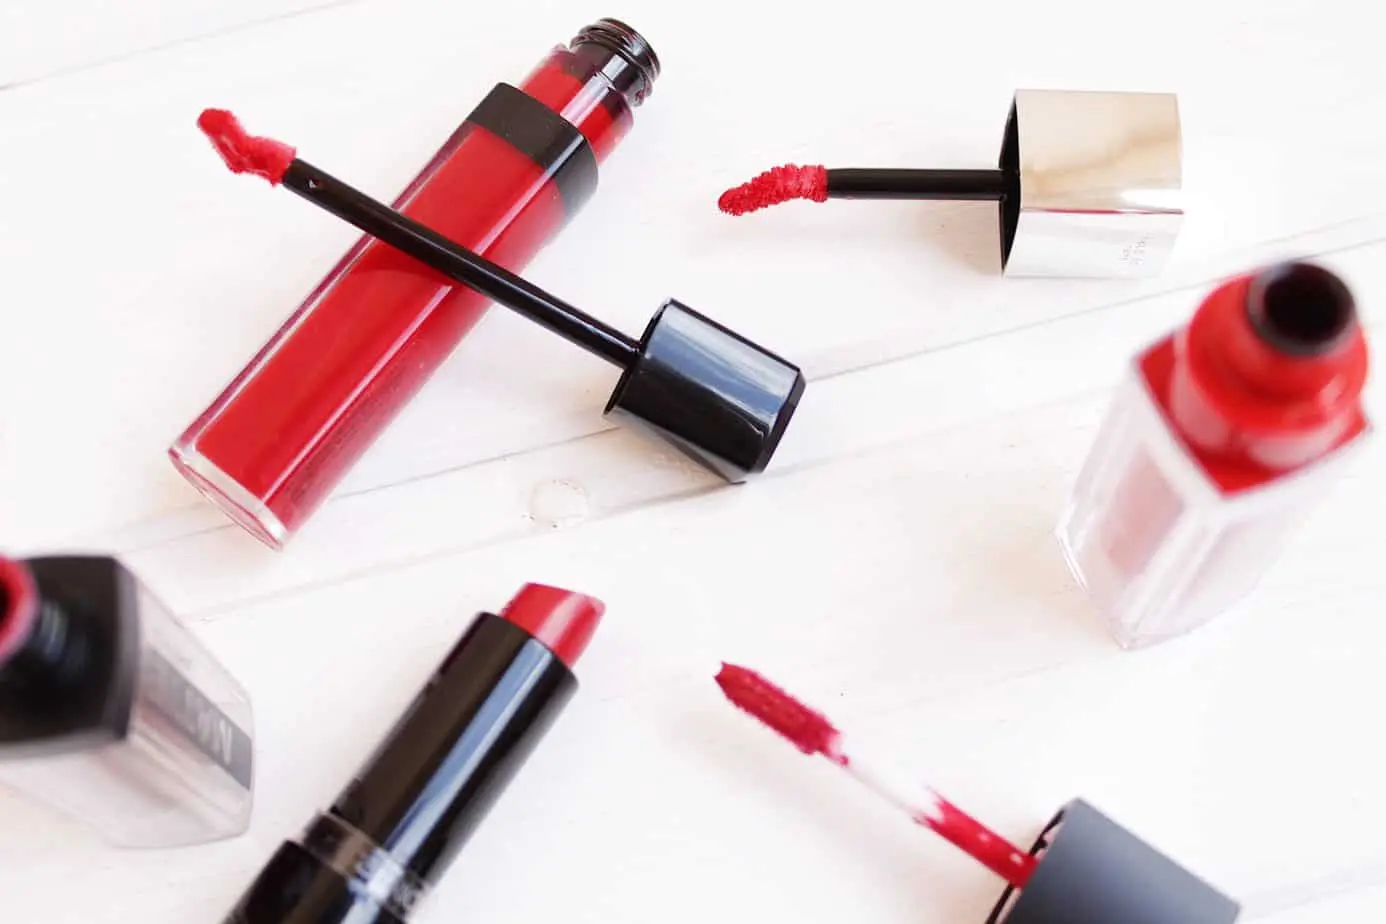 The Main Differences Between Liquid Lipsticks and Lipstick Tubes